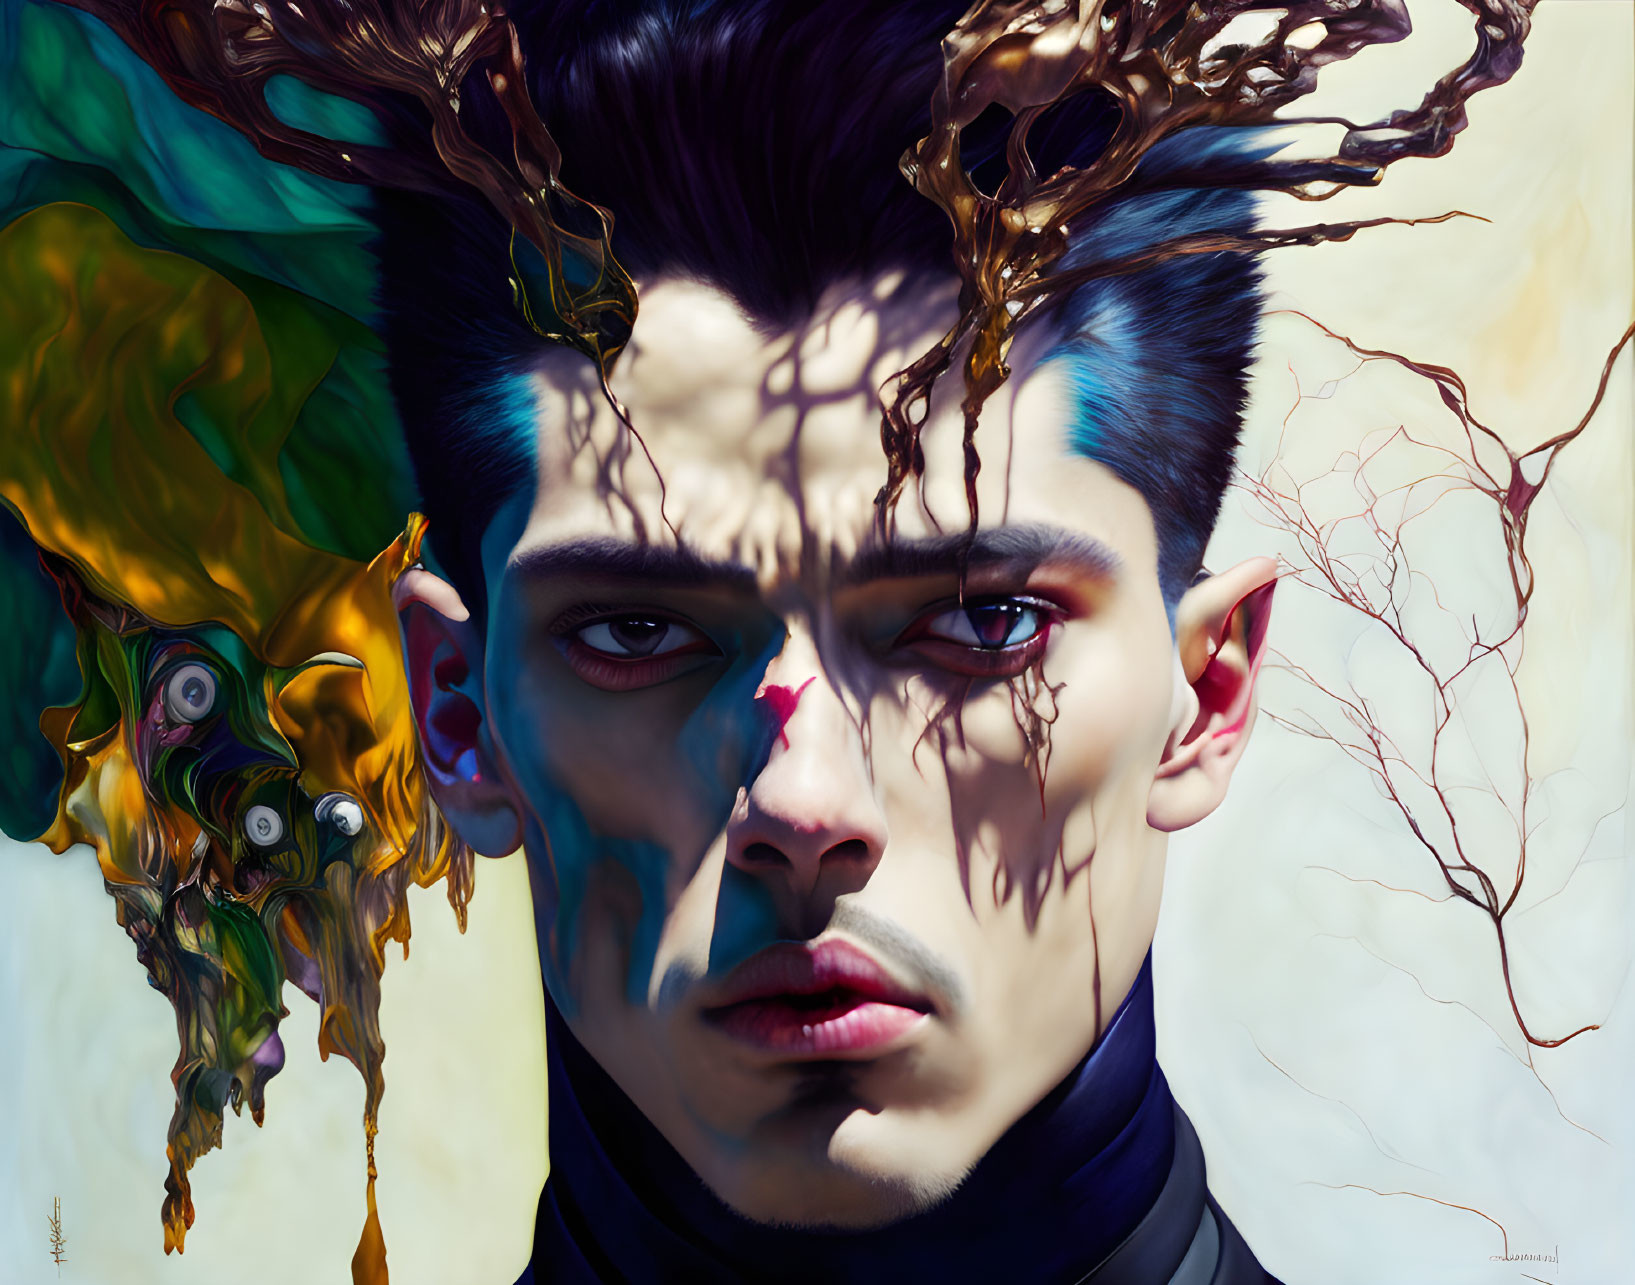 Surreal portrait of man with branches, vibrant colors, and intricate root-like lines